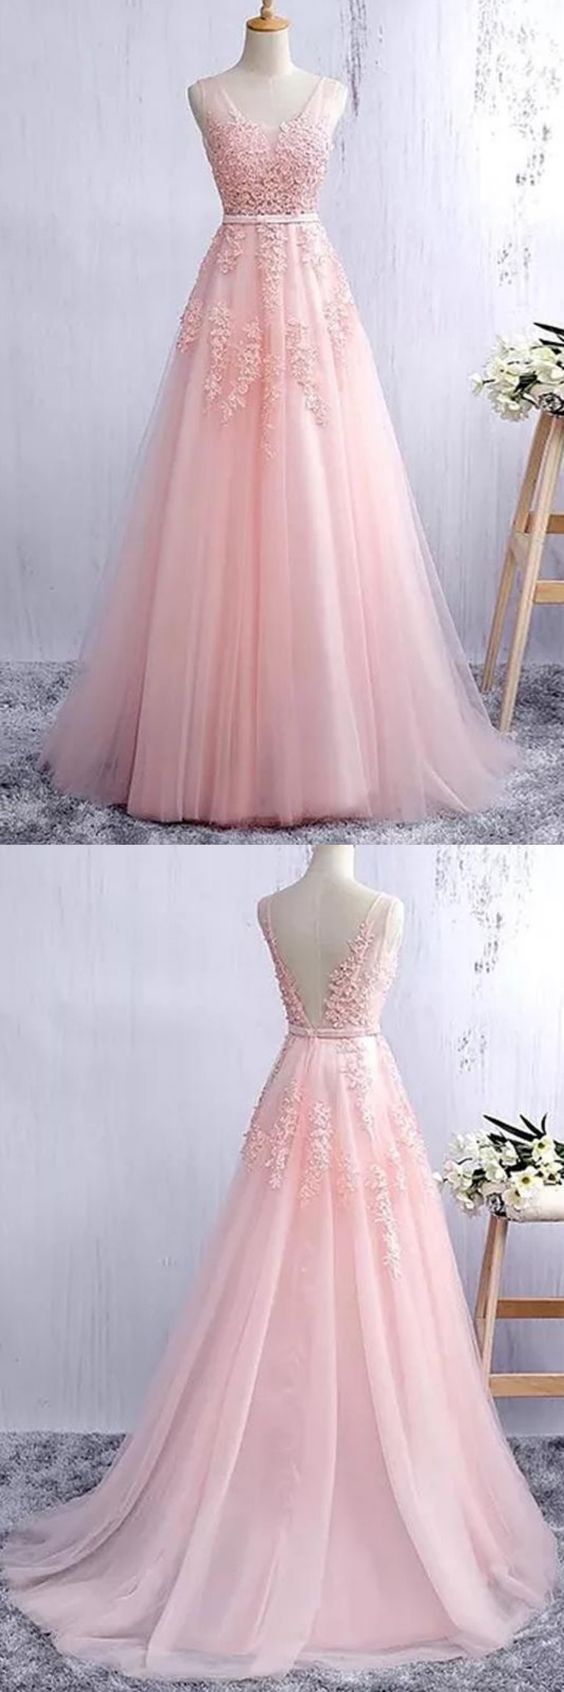 Classic Pink Quinceanera Dress – TulleLux Bridal Crowns & Accessories